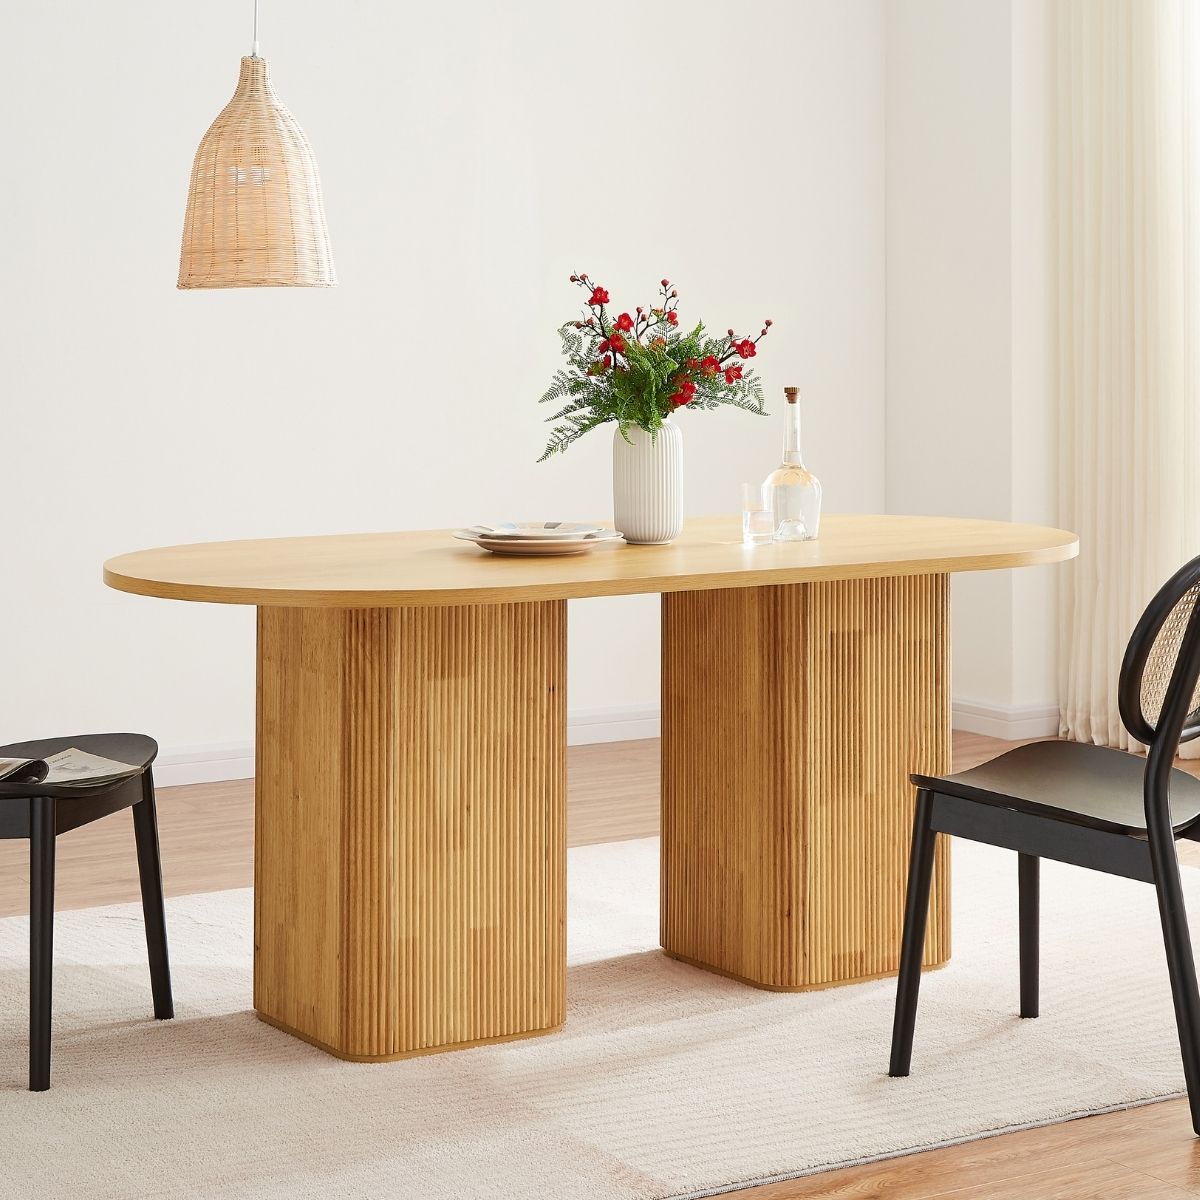 Tate 6 Seater Column Dining Table in Natural